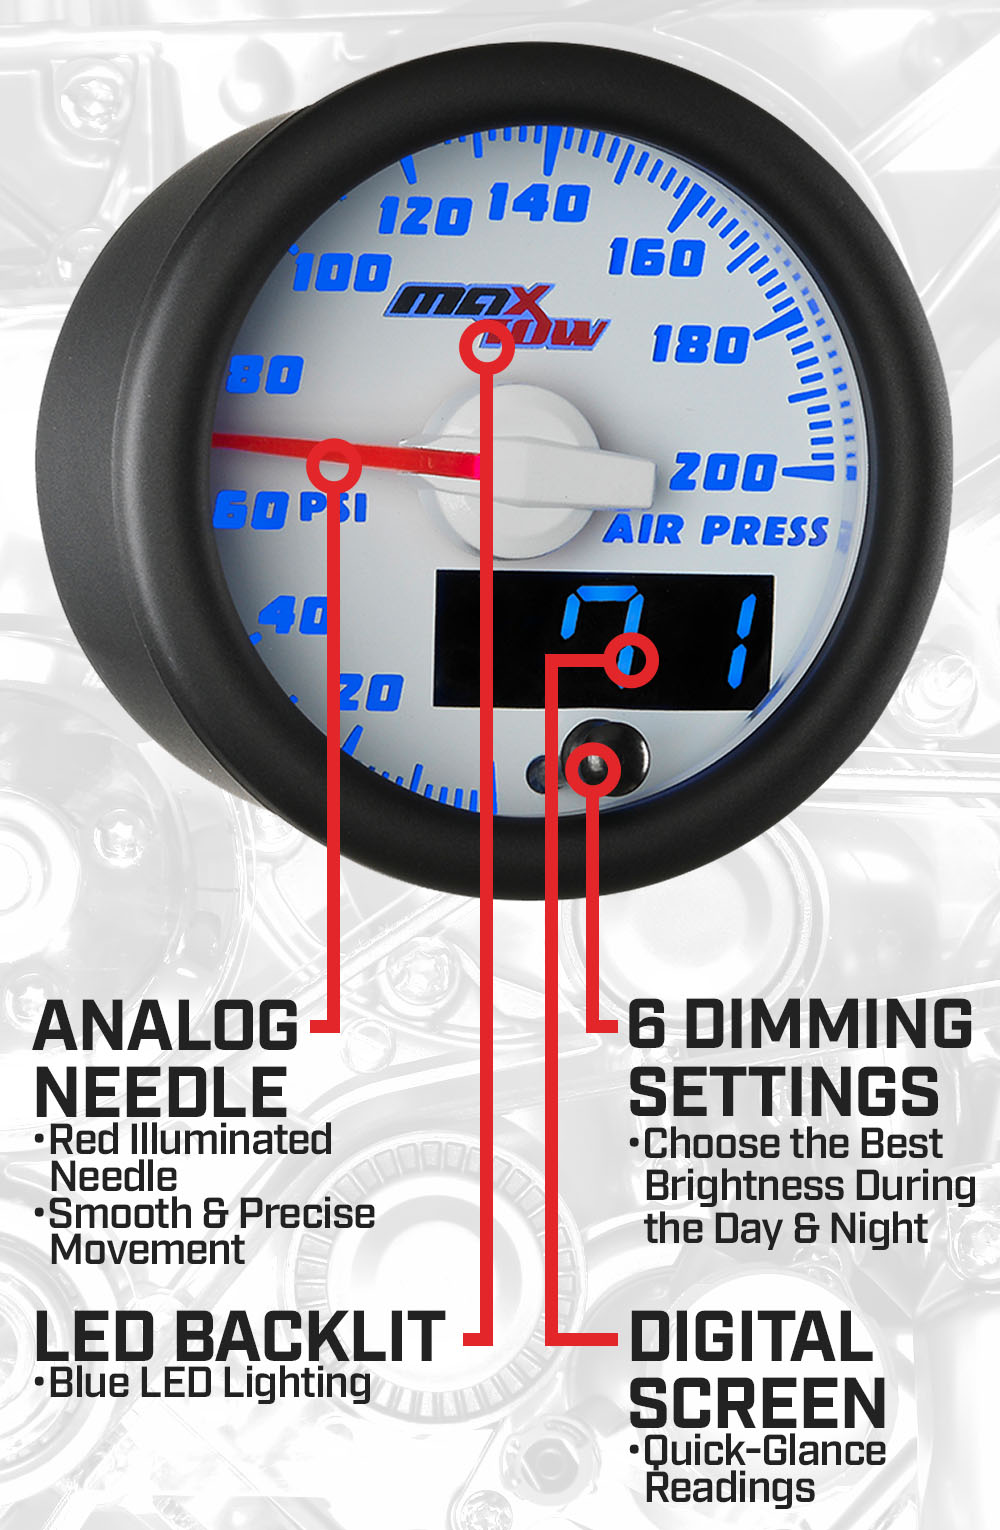 White & Blue Double Vision Air Pressure Gauge Features